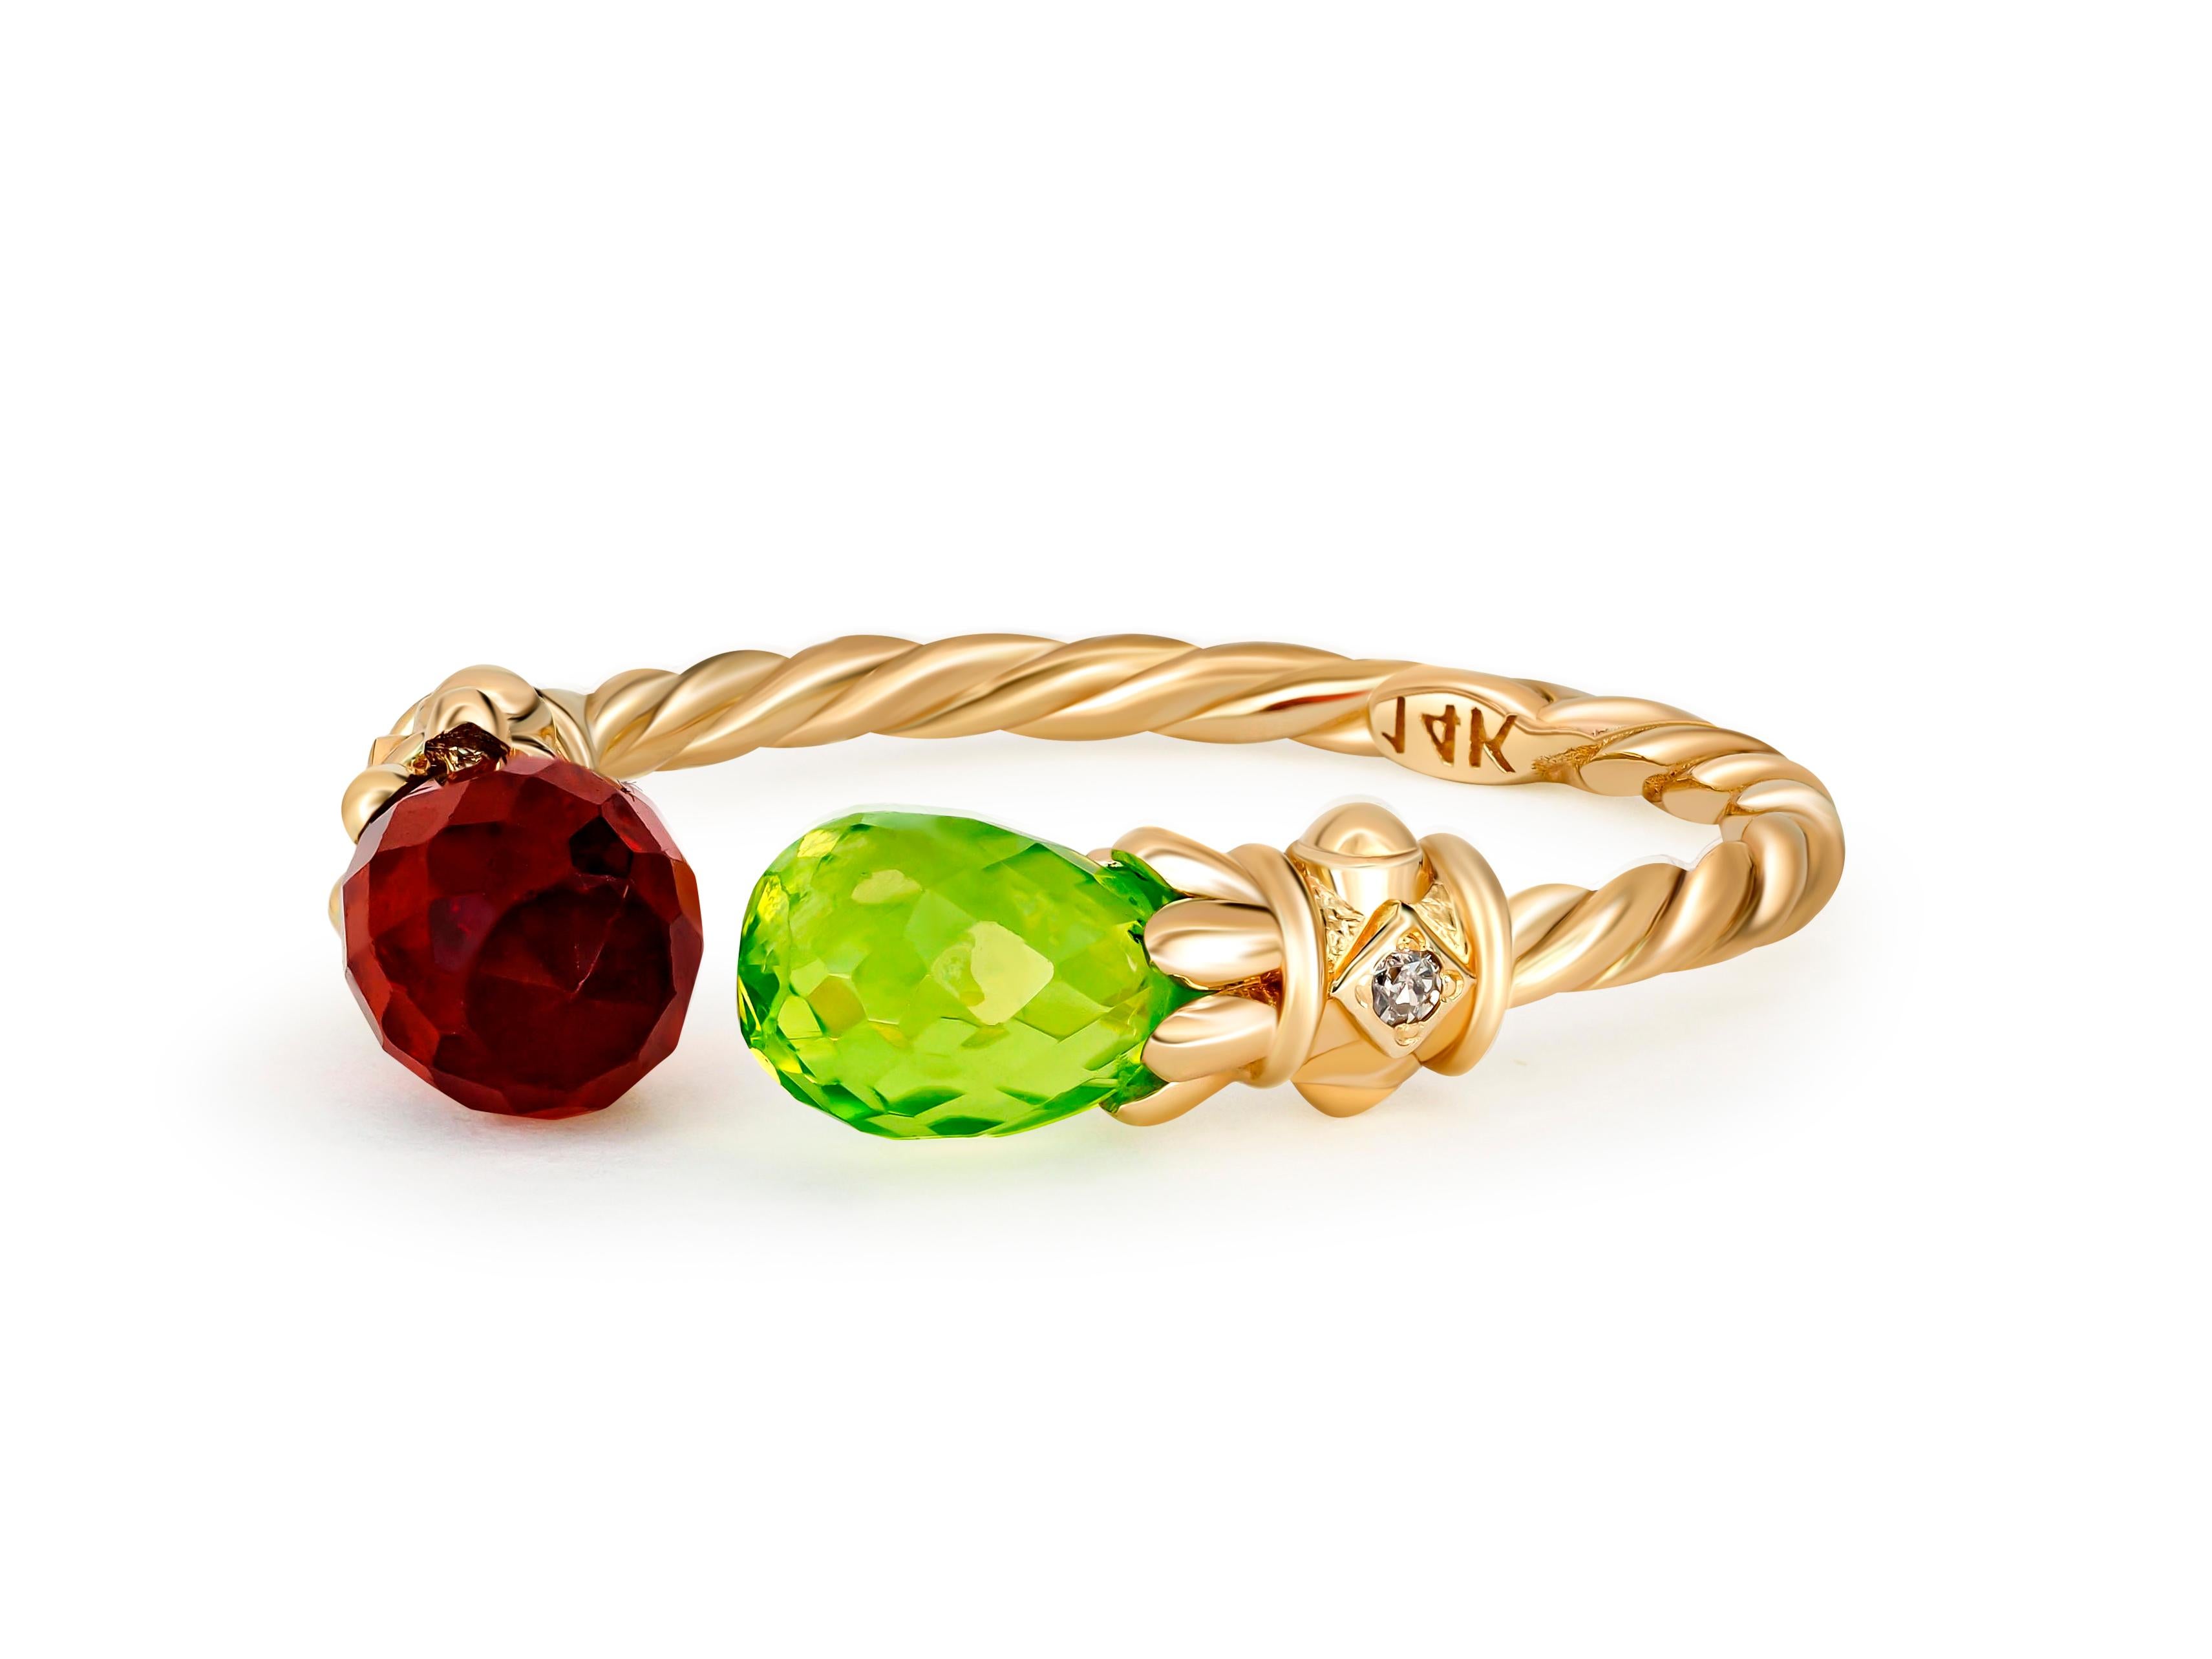 Open ended peridot, amethyst 14k gold ring. 
Briolette gem gold ring. Garnet gold ring. Peridot gold ring. Adjustable gold ring.

Total weight: 2.60 g. depends from choosen size
Metal: 14k gold.

Stones:
Peridot:
Cut: Briolette
Weight: approx 1.0